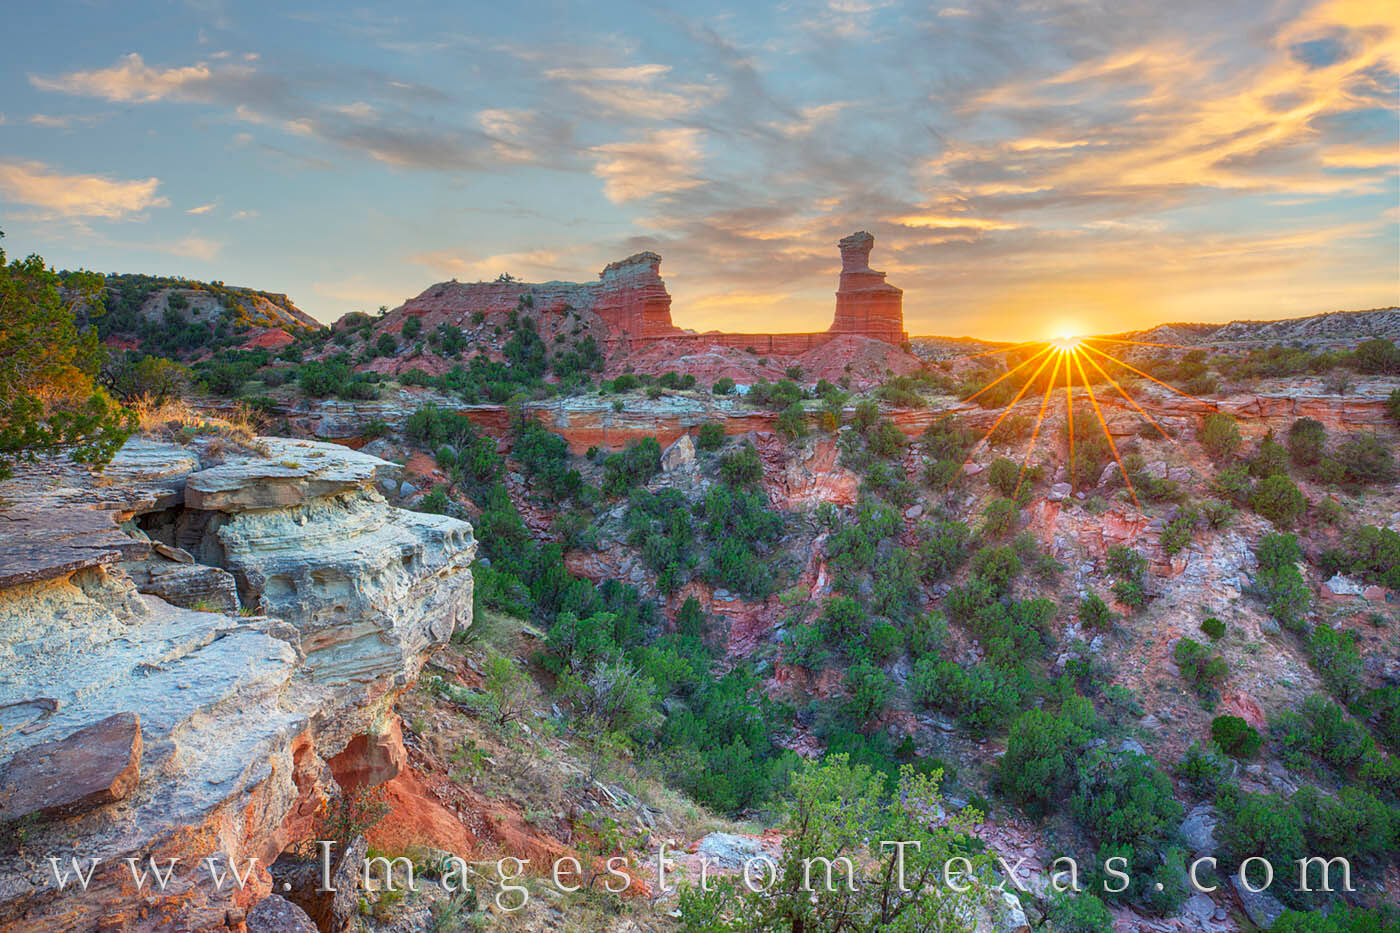 Sunset at the Lighthouse in Palo Duro Canyon is a beautiful sight.